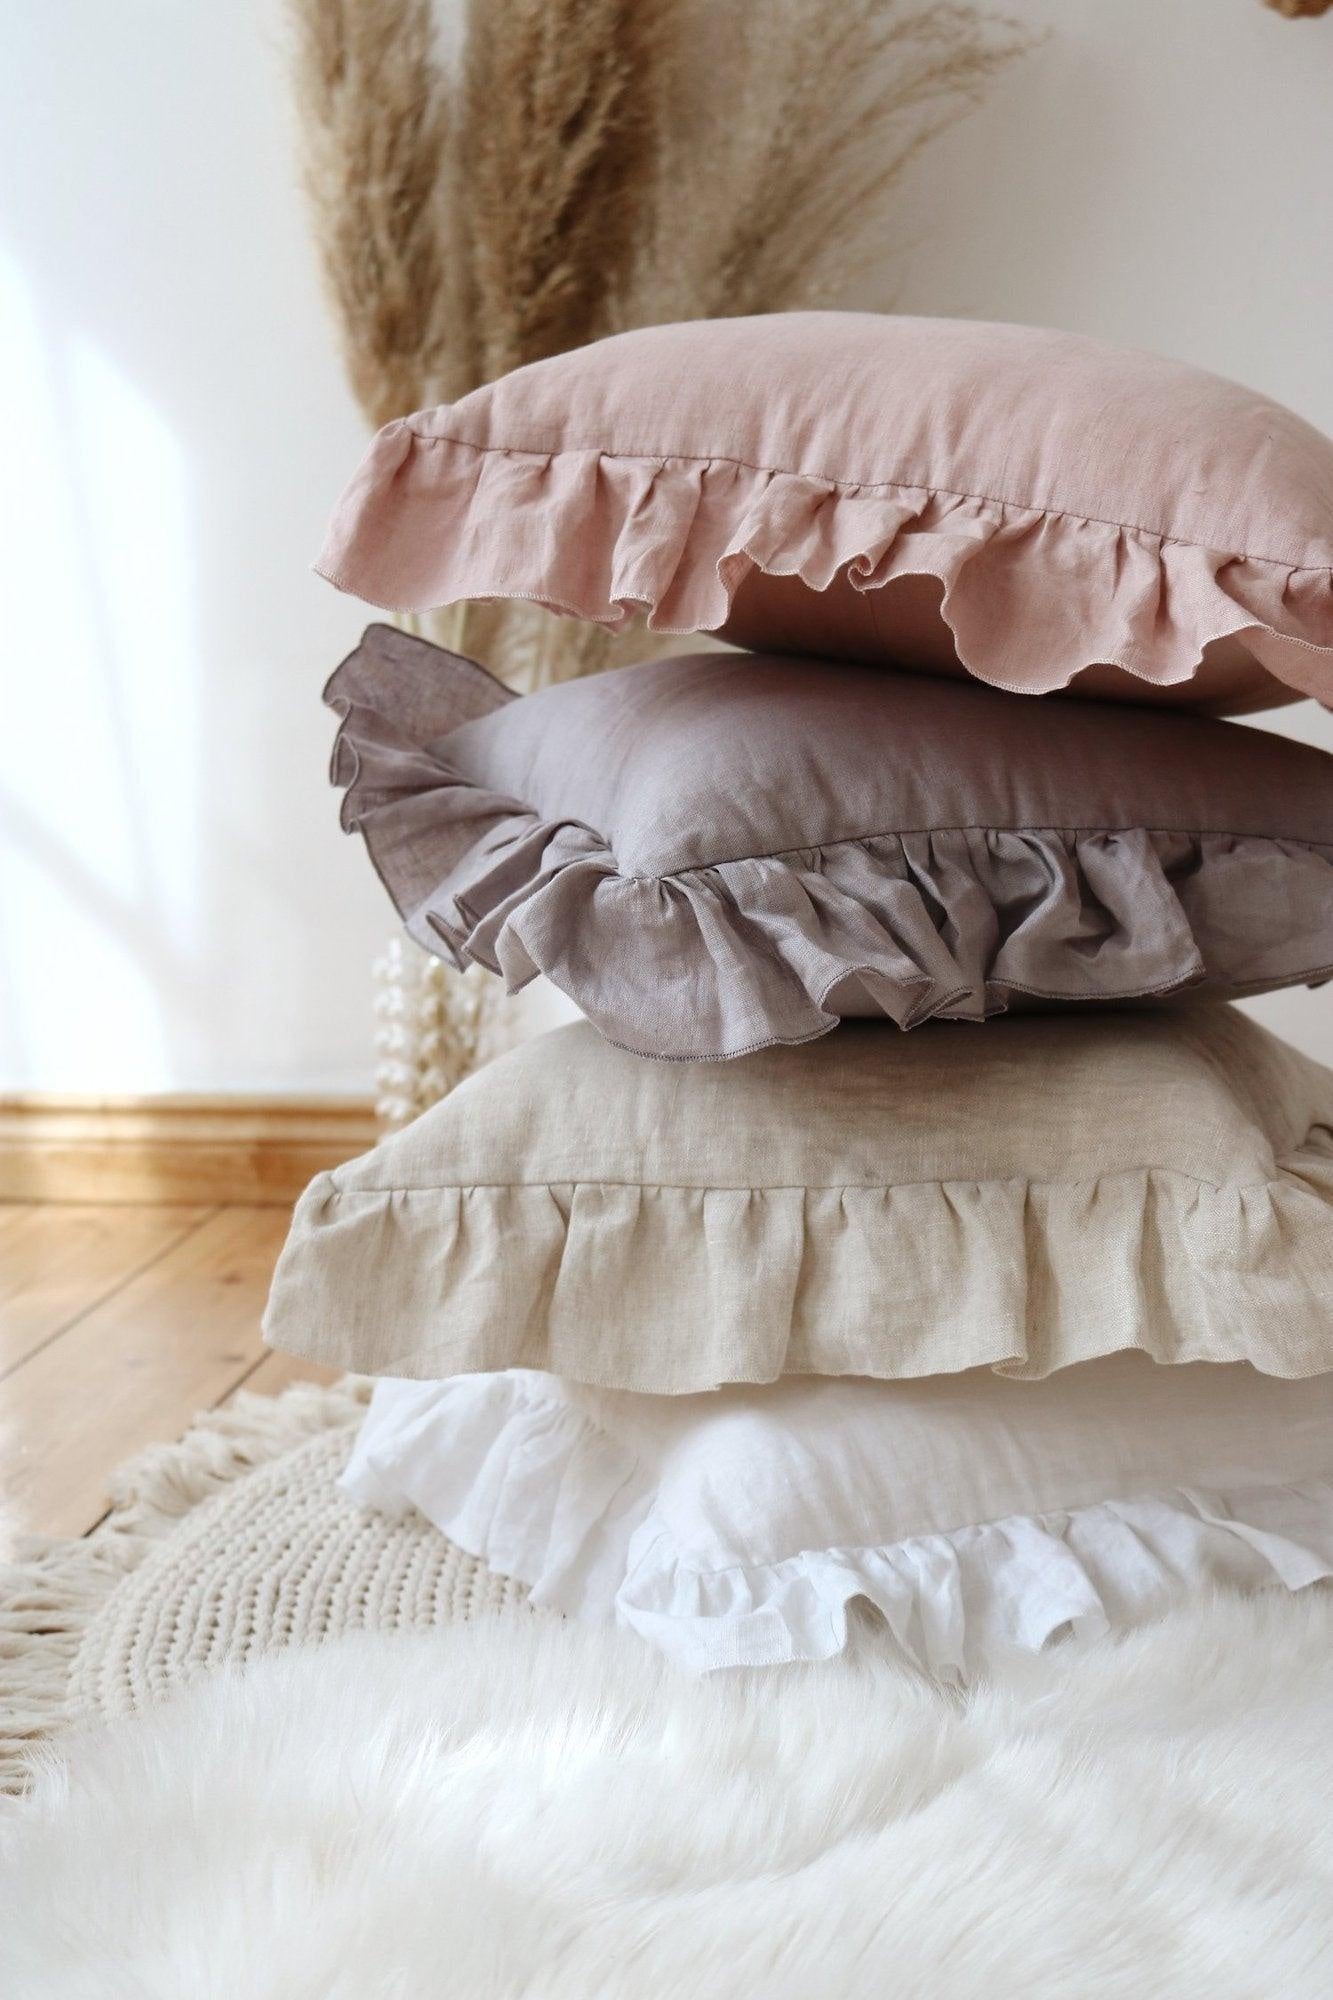 “Powder Pink Frill” Linen Cushion Cover with Frill - Moi Mili